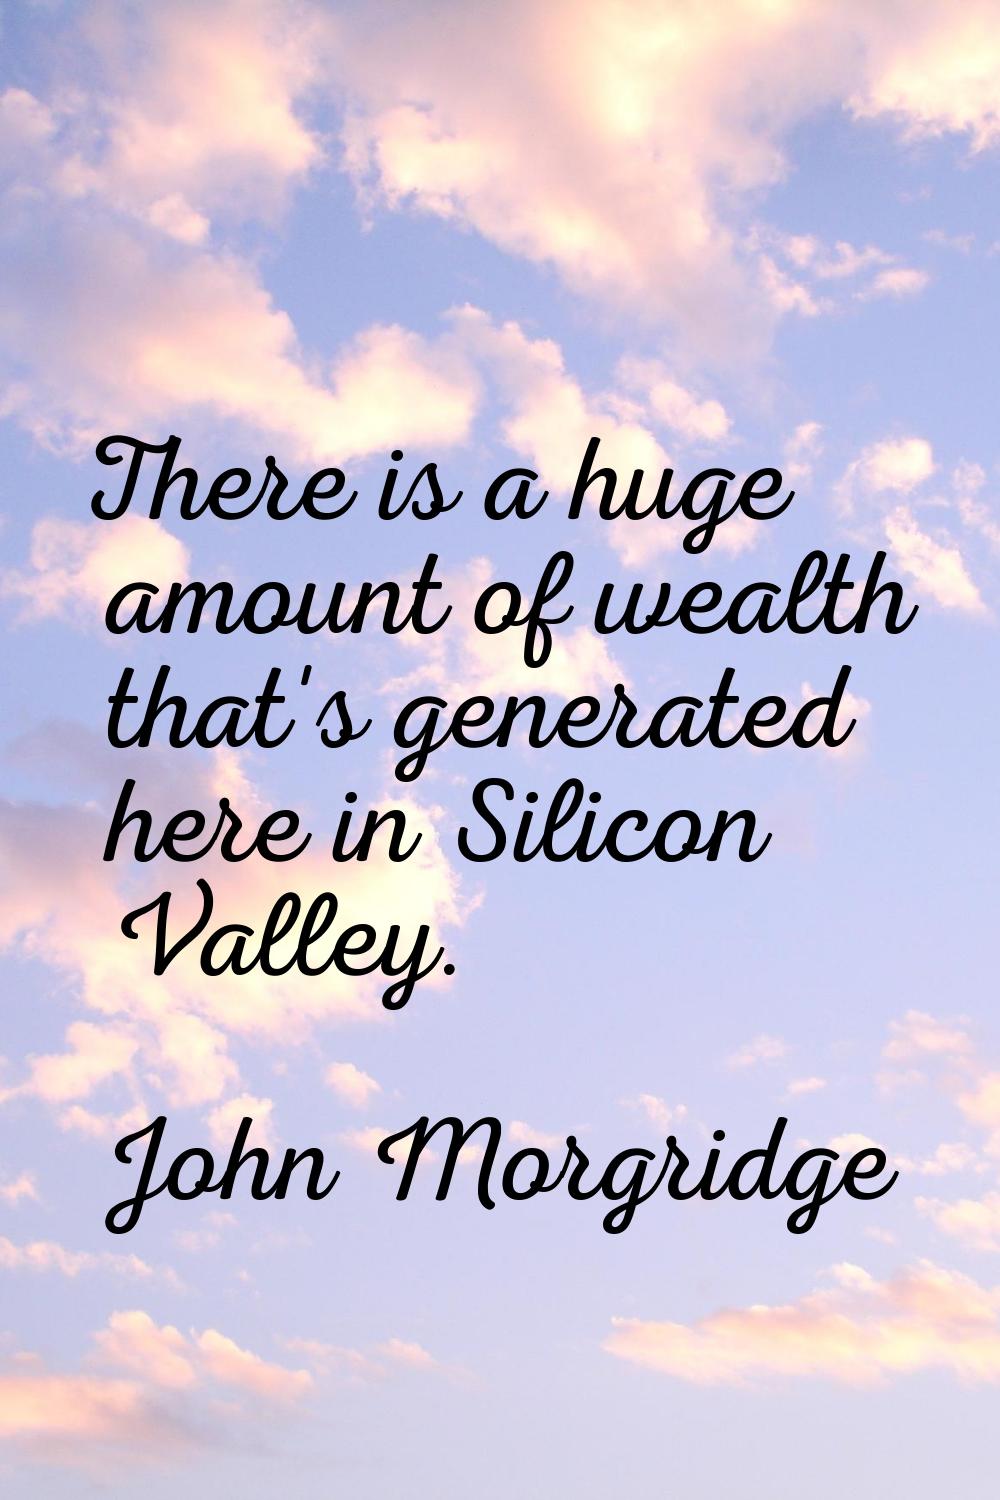 There is a huge amount of wealth that's generated here in Silicon Valley.